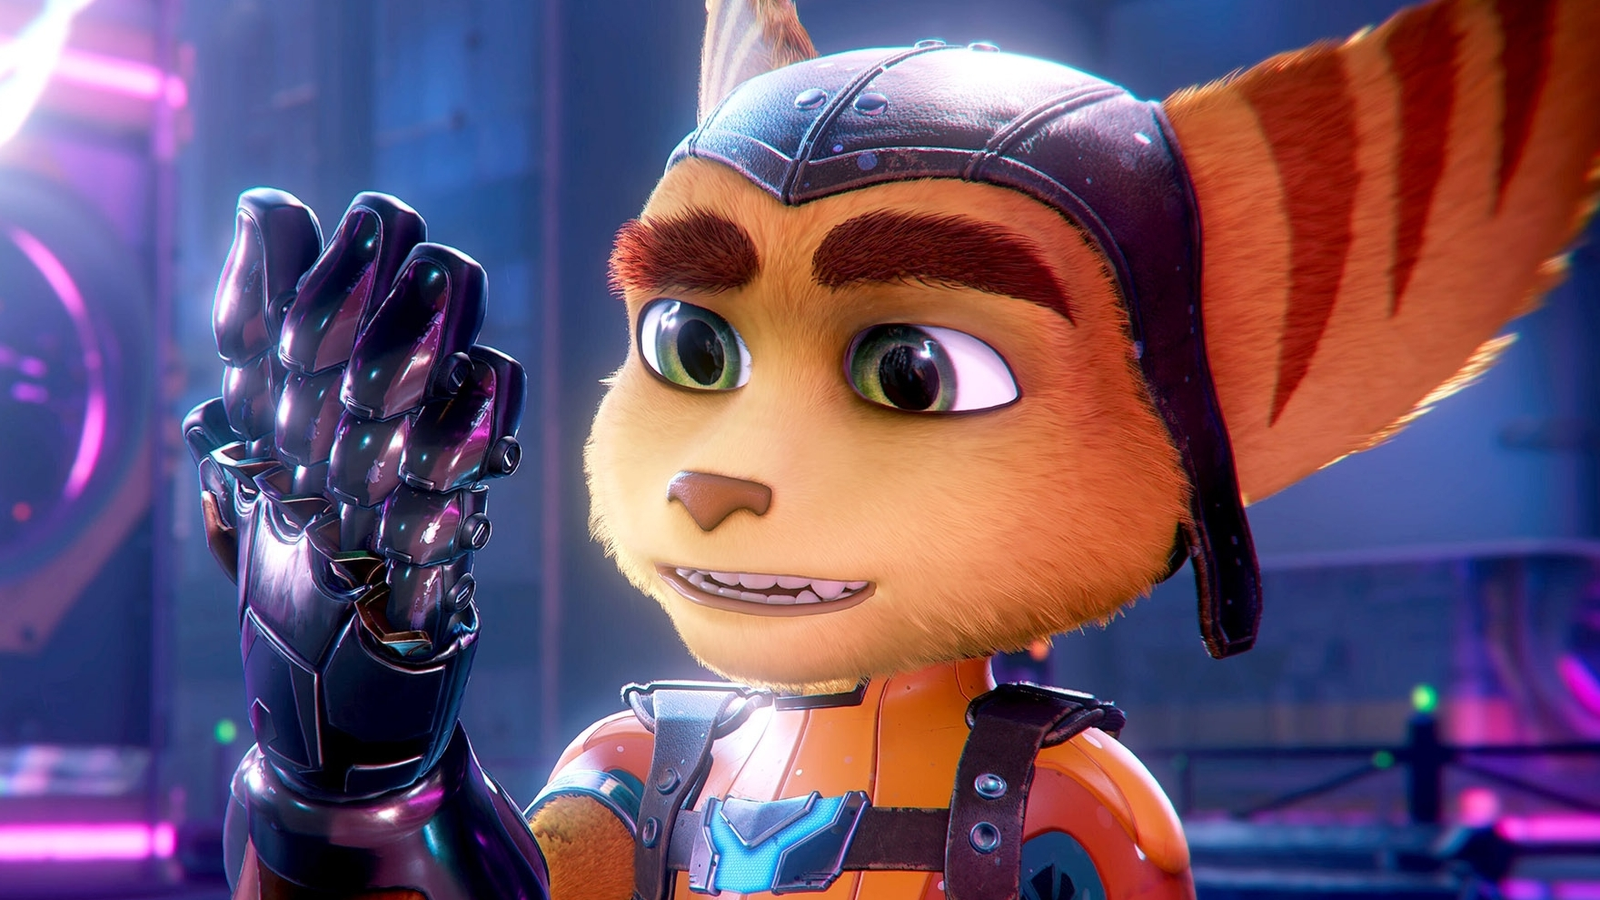 Ratchet & Clank: Rift Apart review: A great showcase for the PS5 - Polygon